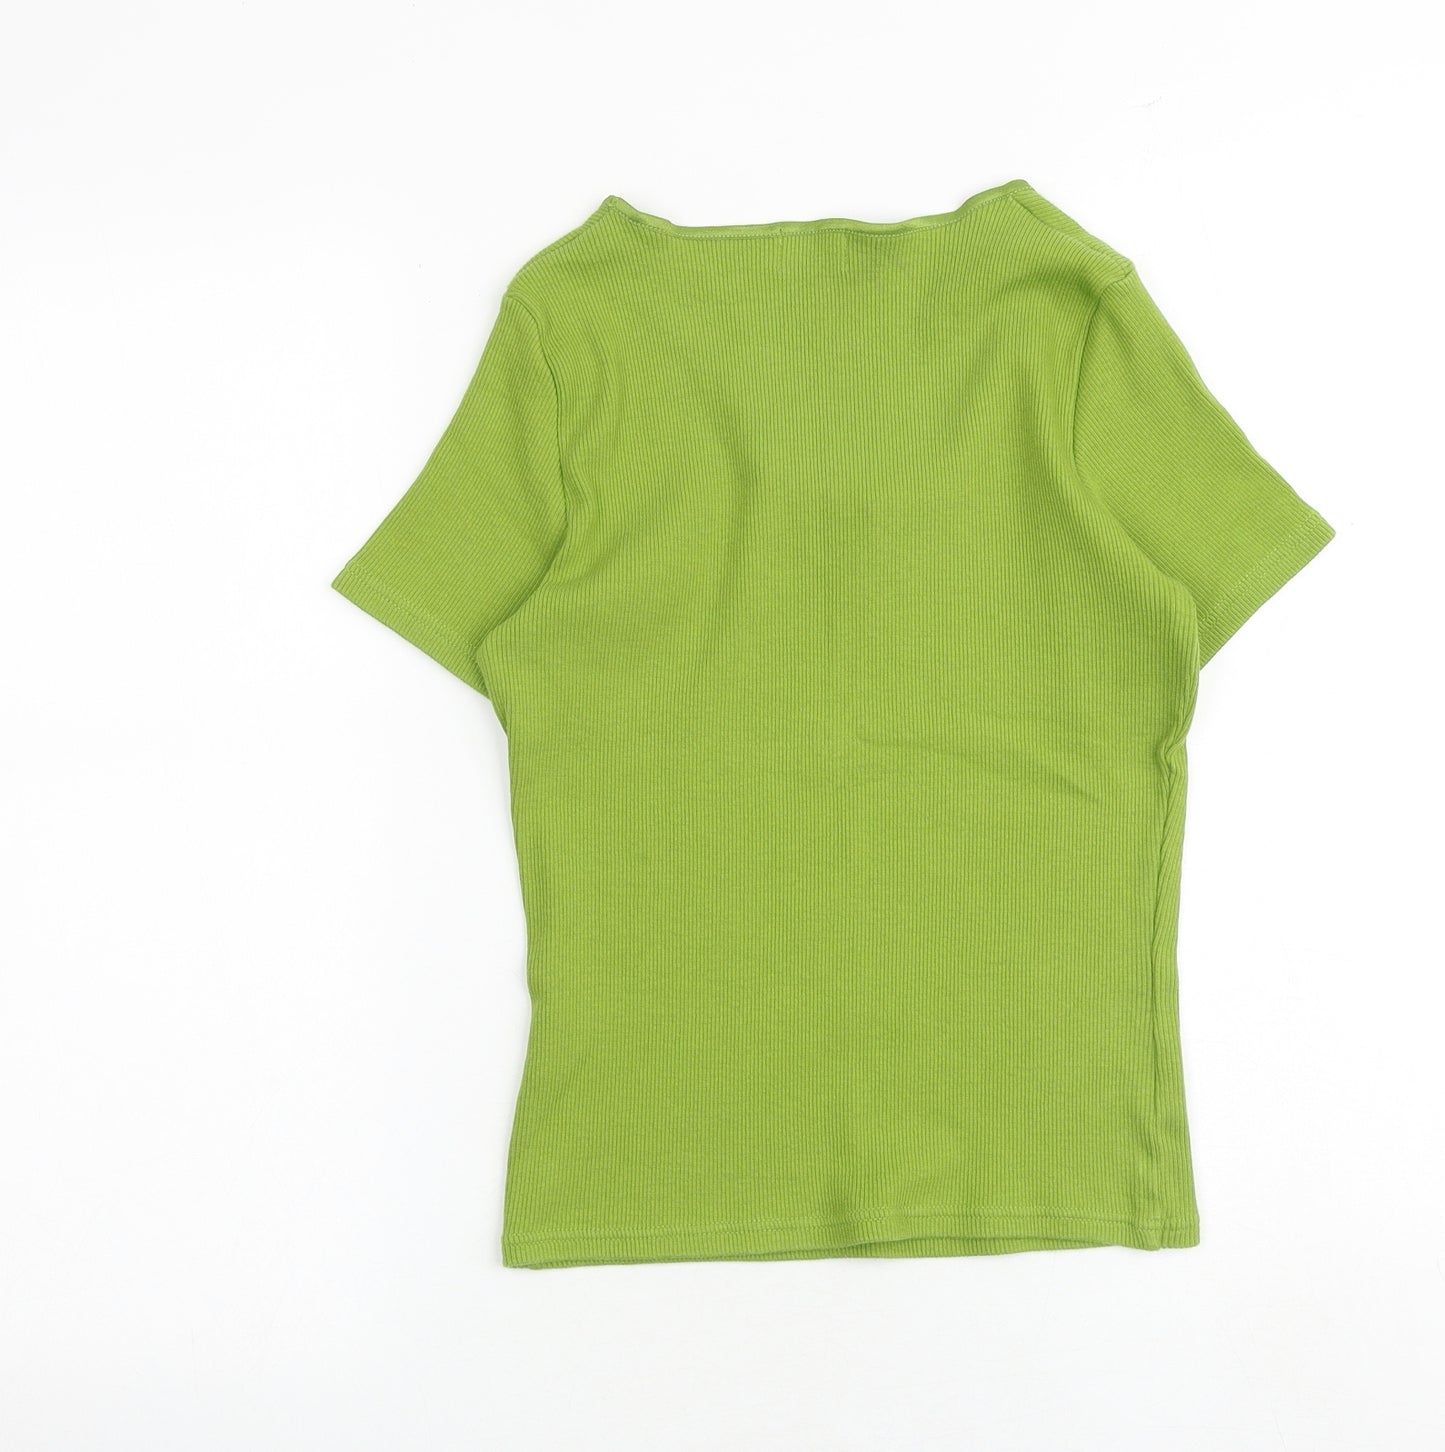 Hobbs Womens Green Cotton Basic T-Shirt Size 14 Scoop Neck - Ribbed